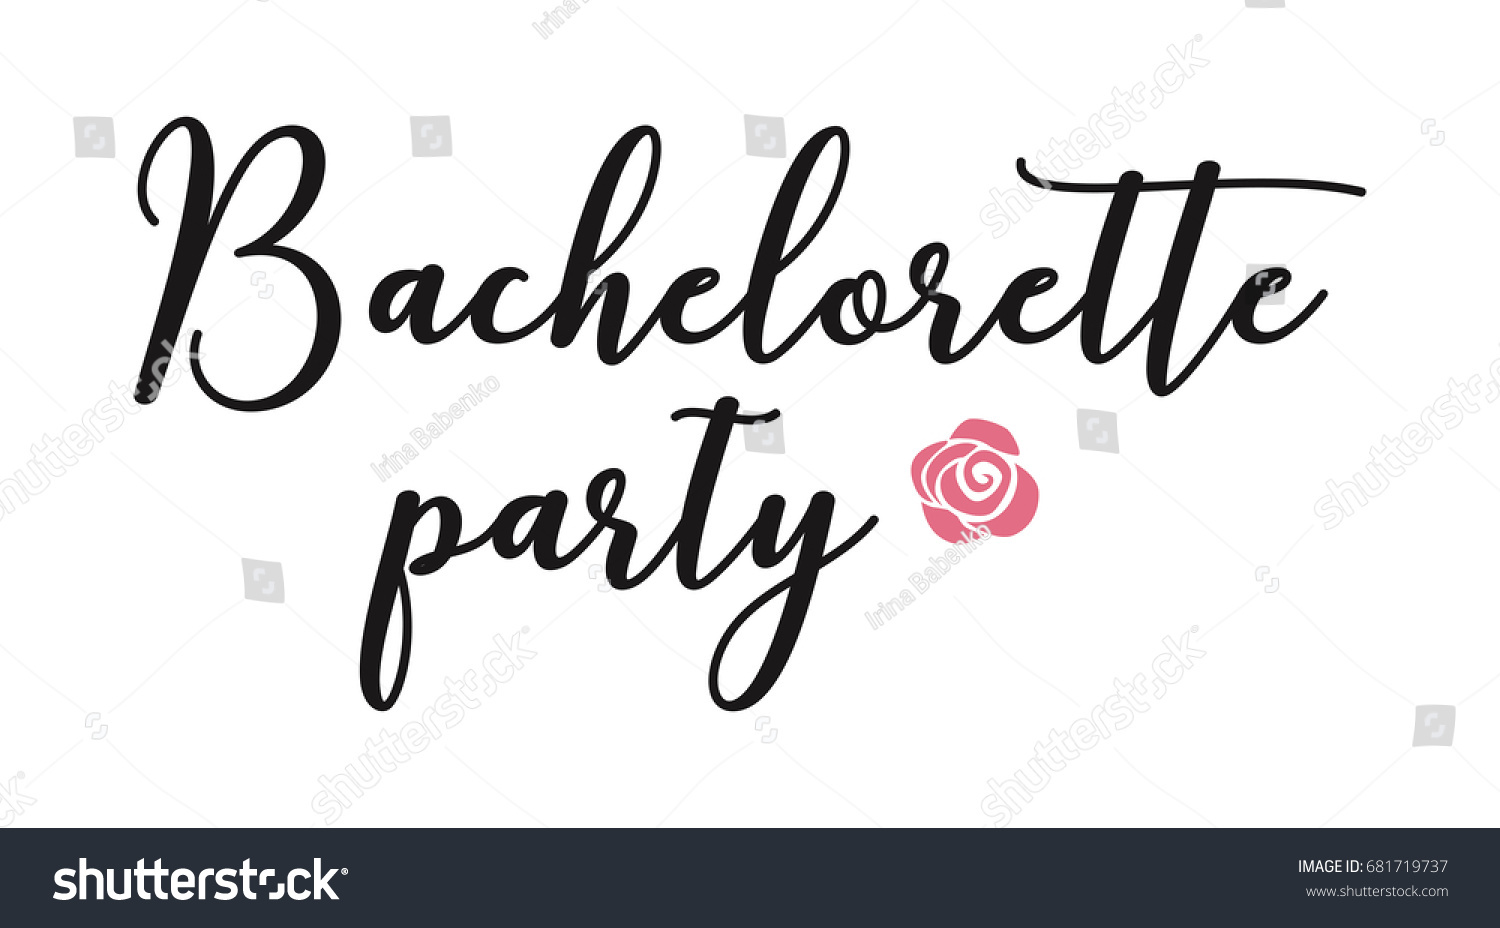 Bachelorette Party Calligraphy Postcard Banner Poster Stock Vector ...